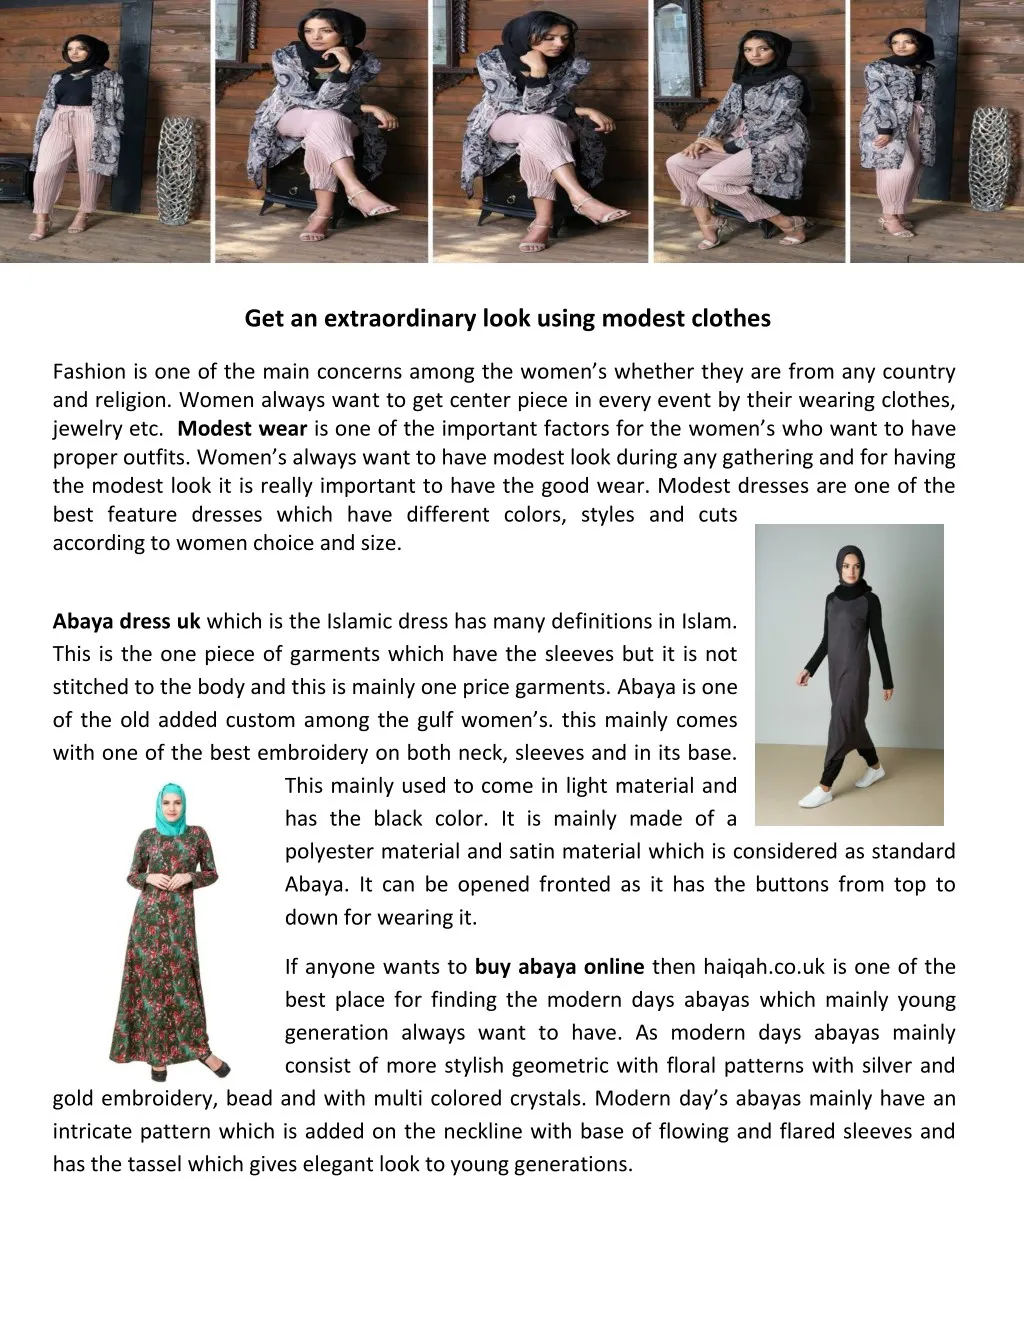 get an extraordinary look using modest clothes